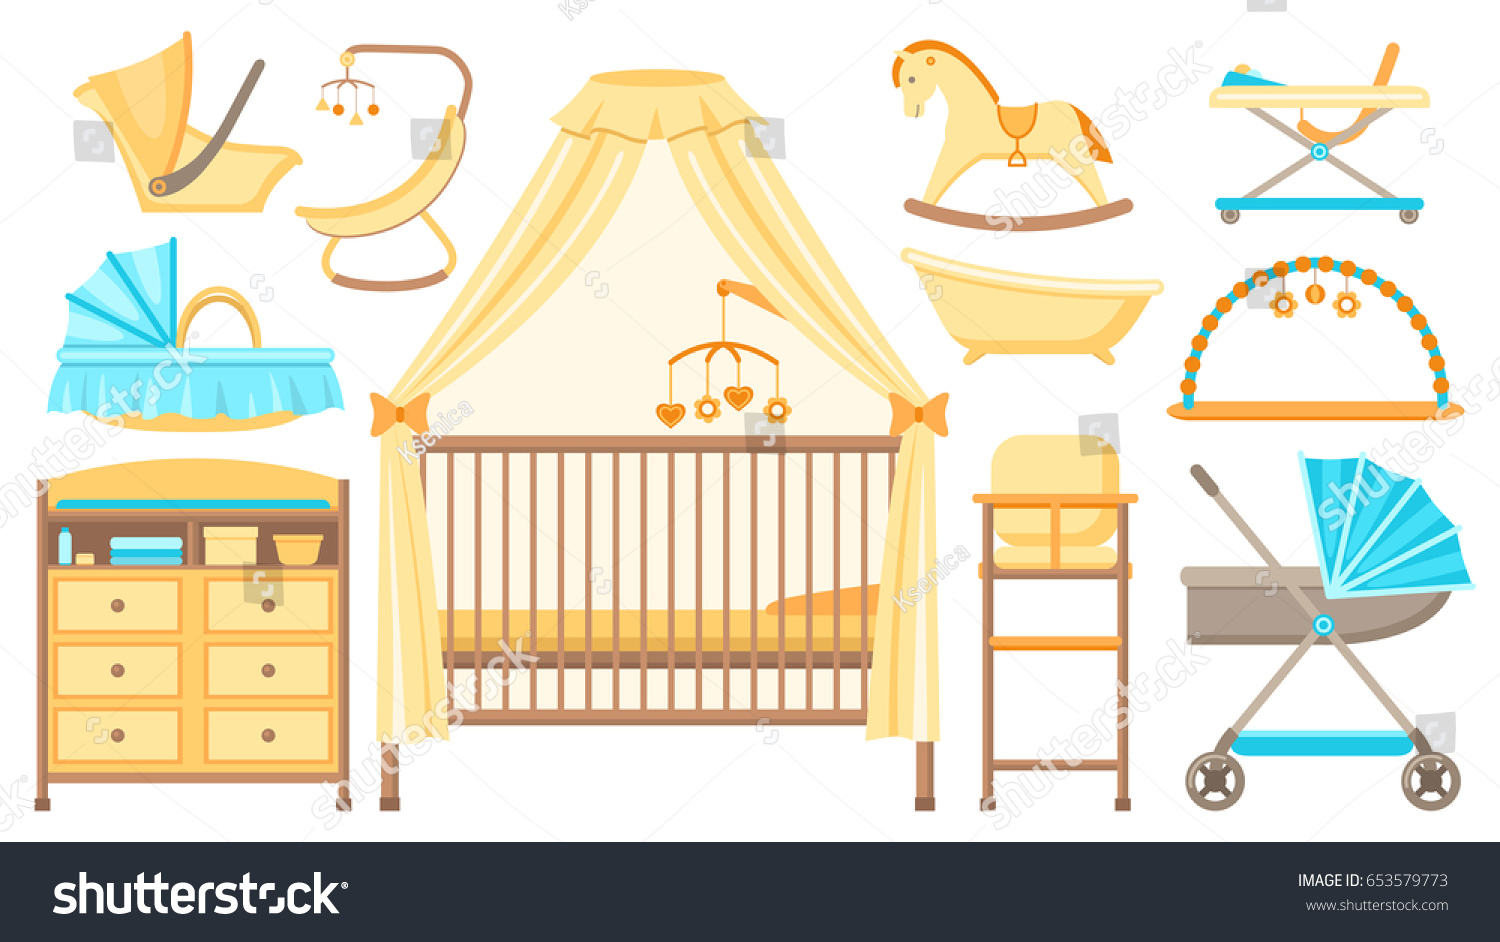 cot and change table set